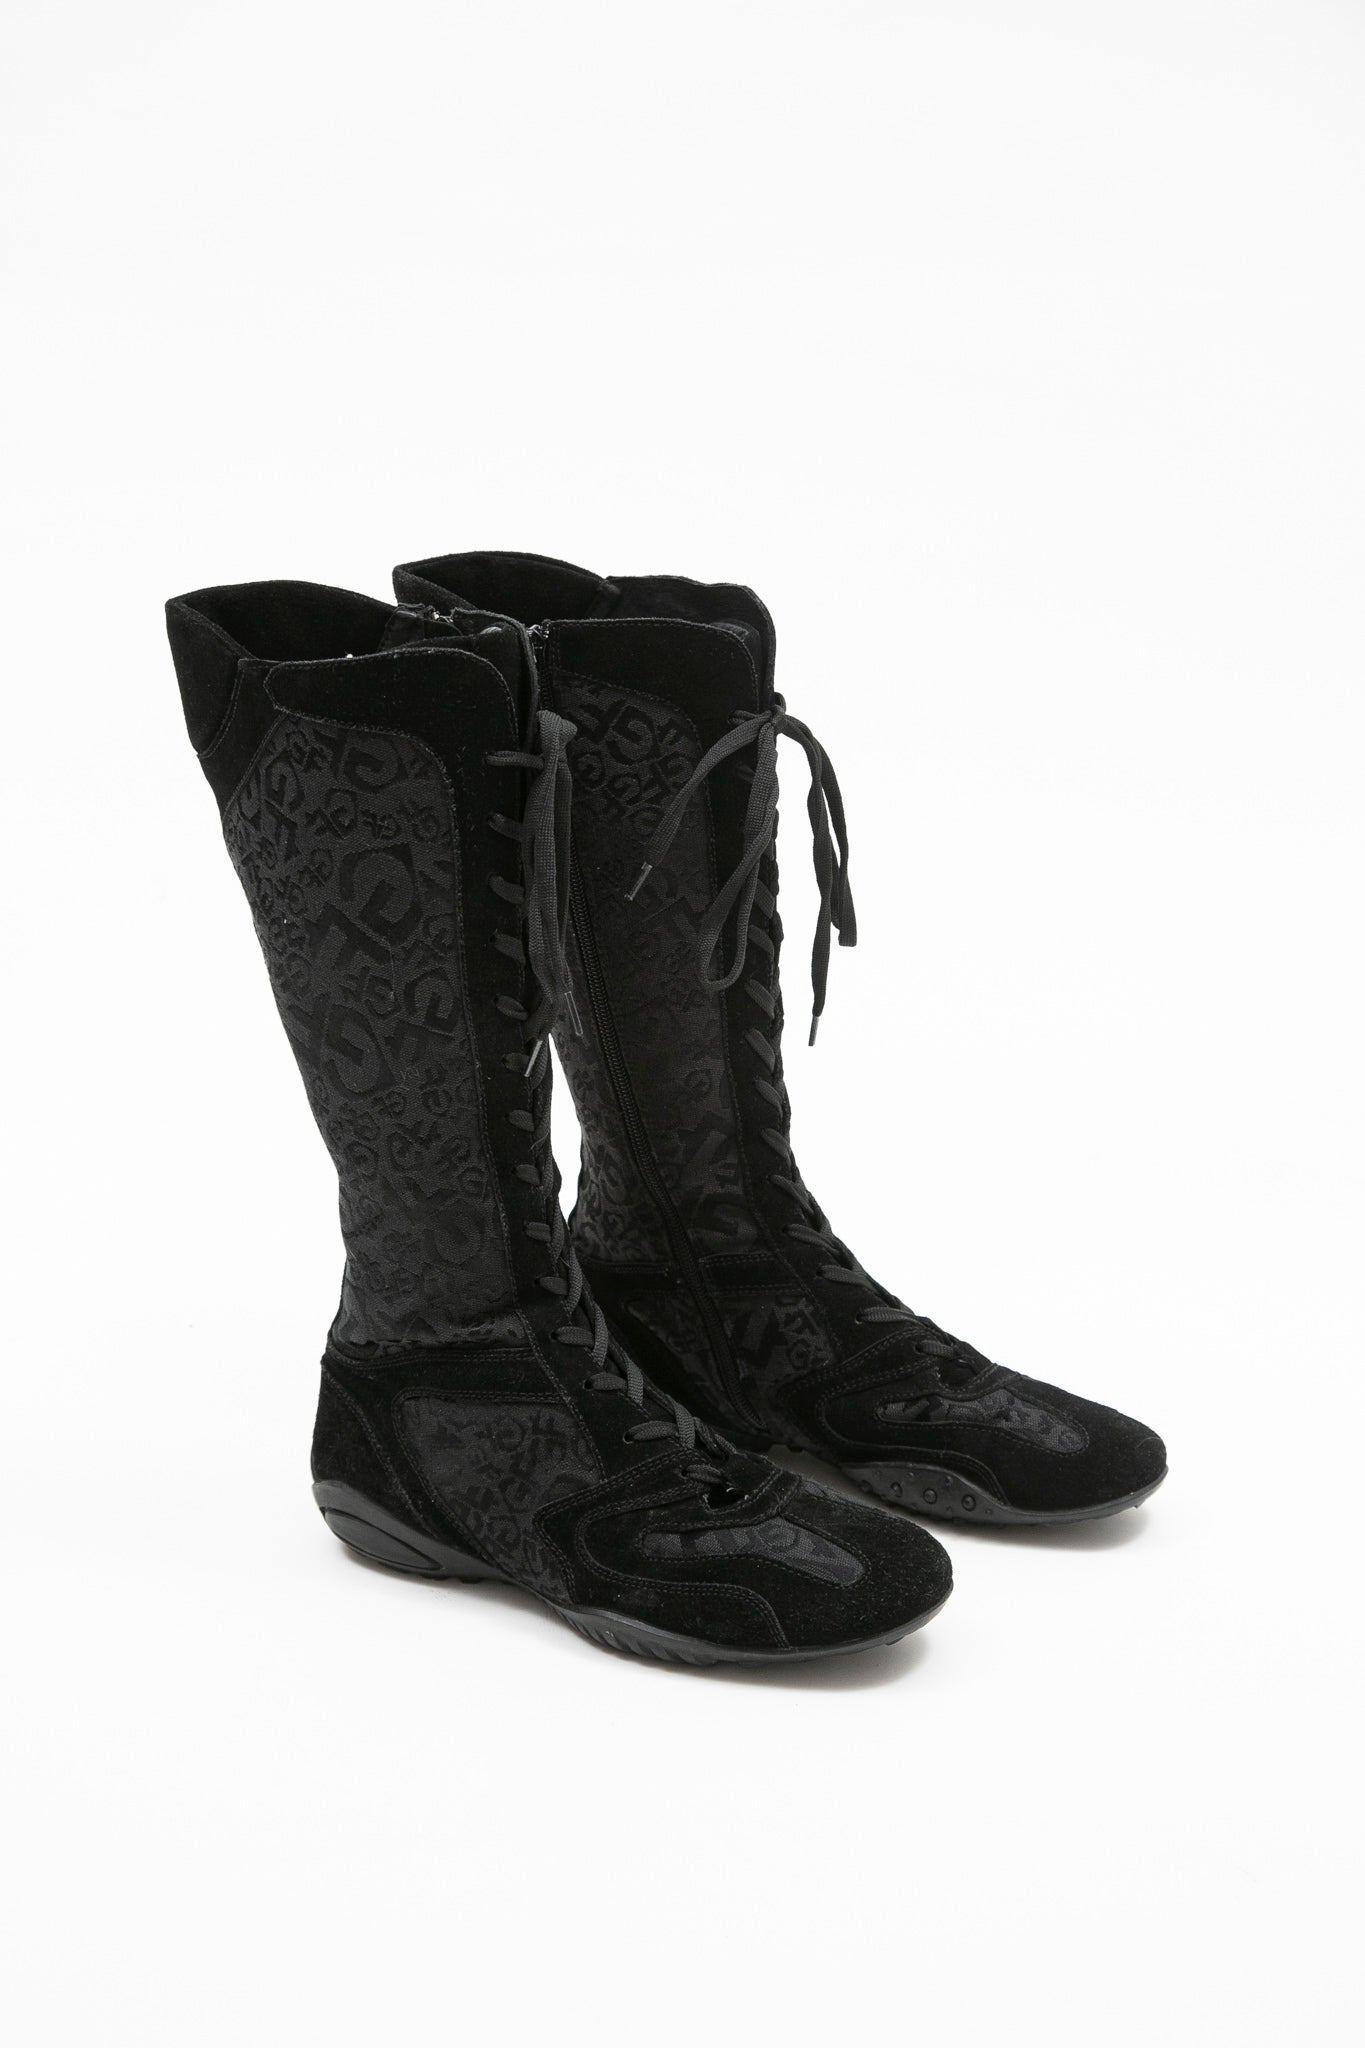 Gianfranco Ferre Lace-up Boxing Boots